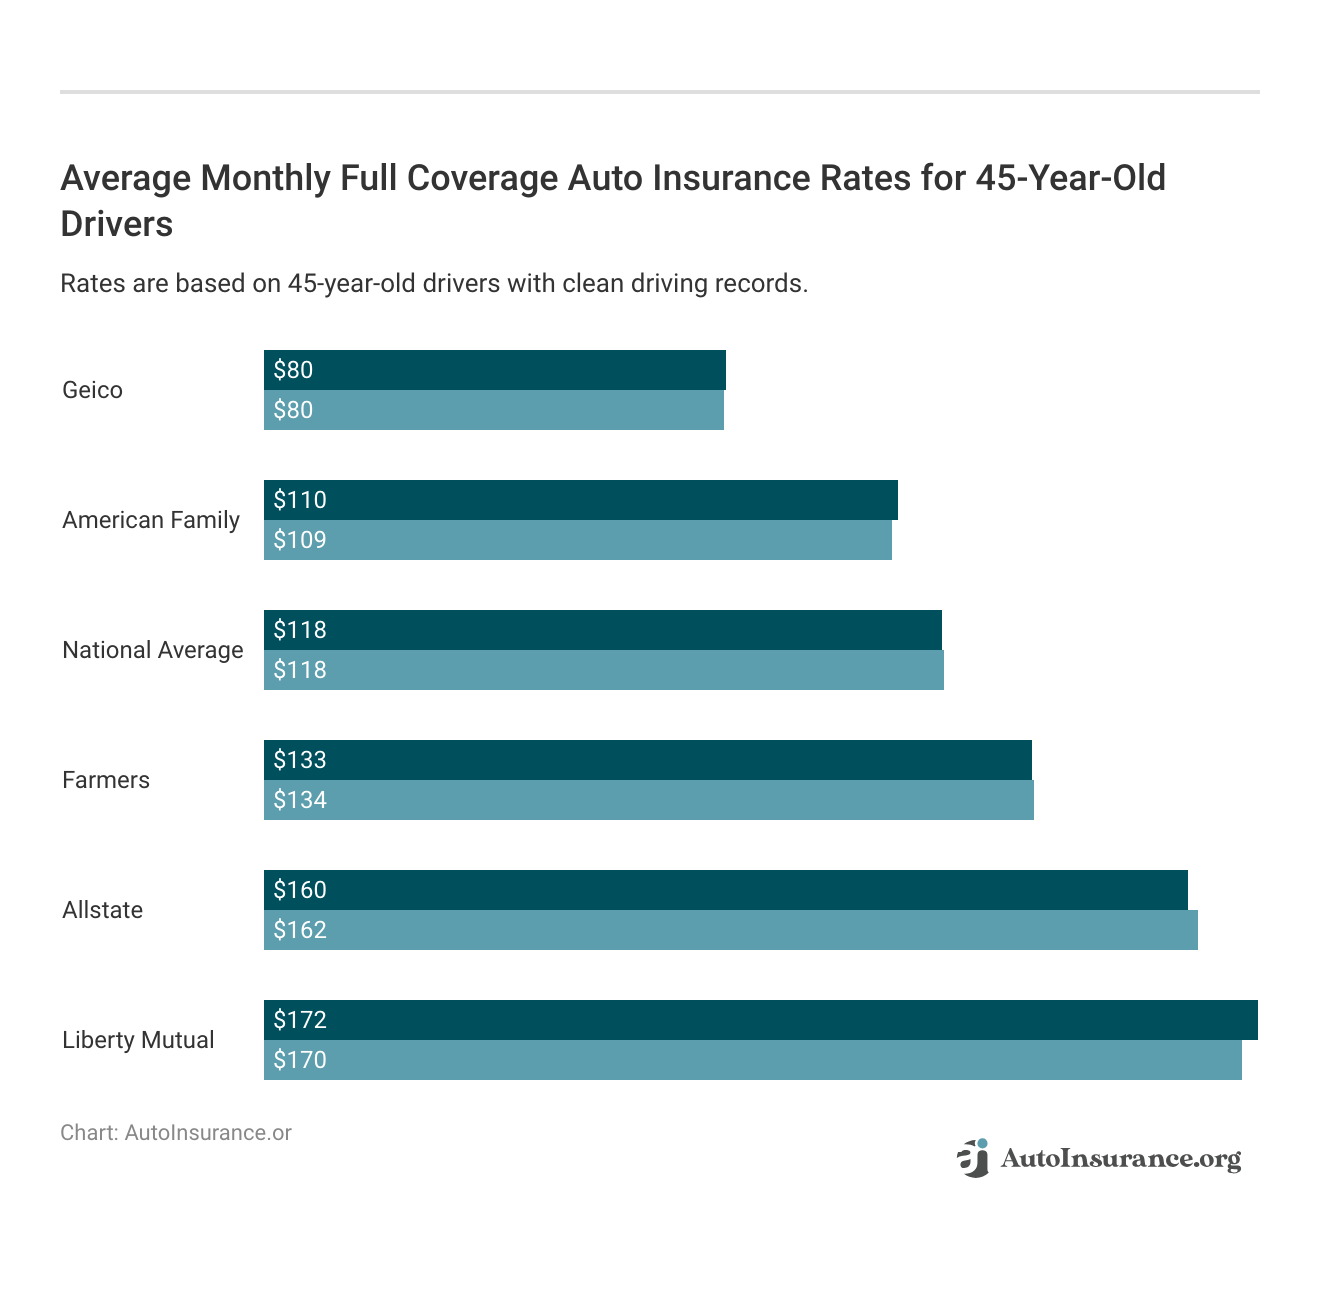 <h3>Average Monthly Full Coverage Auto Insurance Rates for 45-Year-Old Drivers</h3>